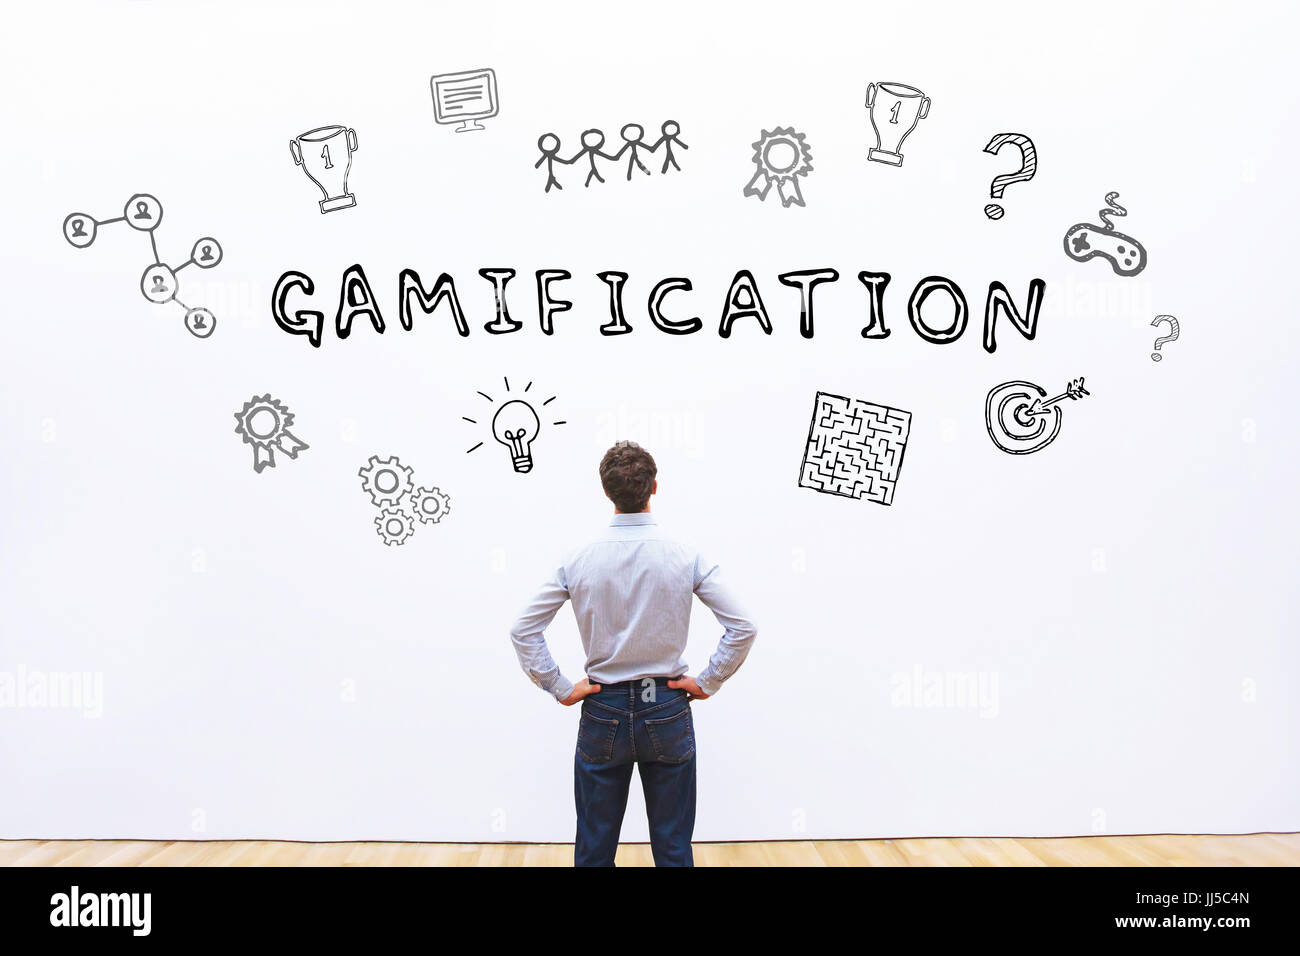 Gamification concept Banque D'Images